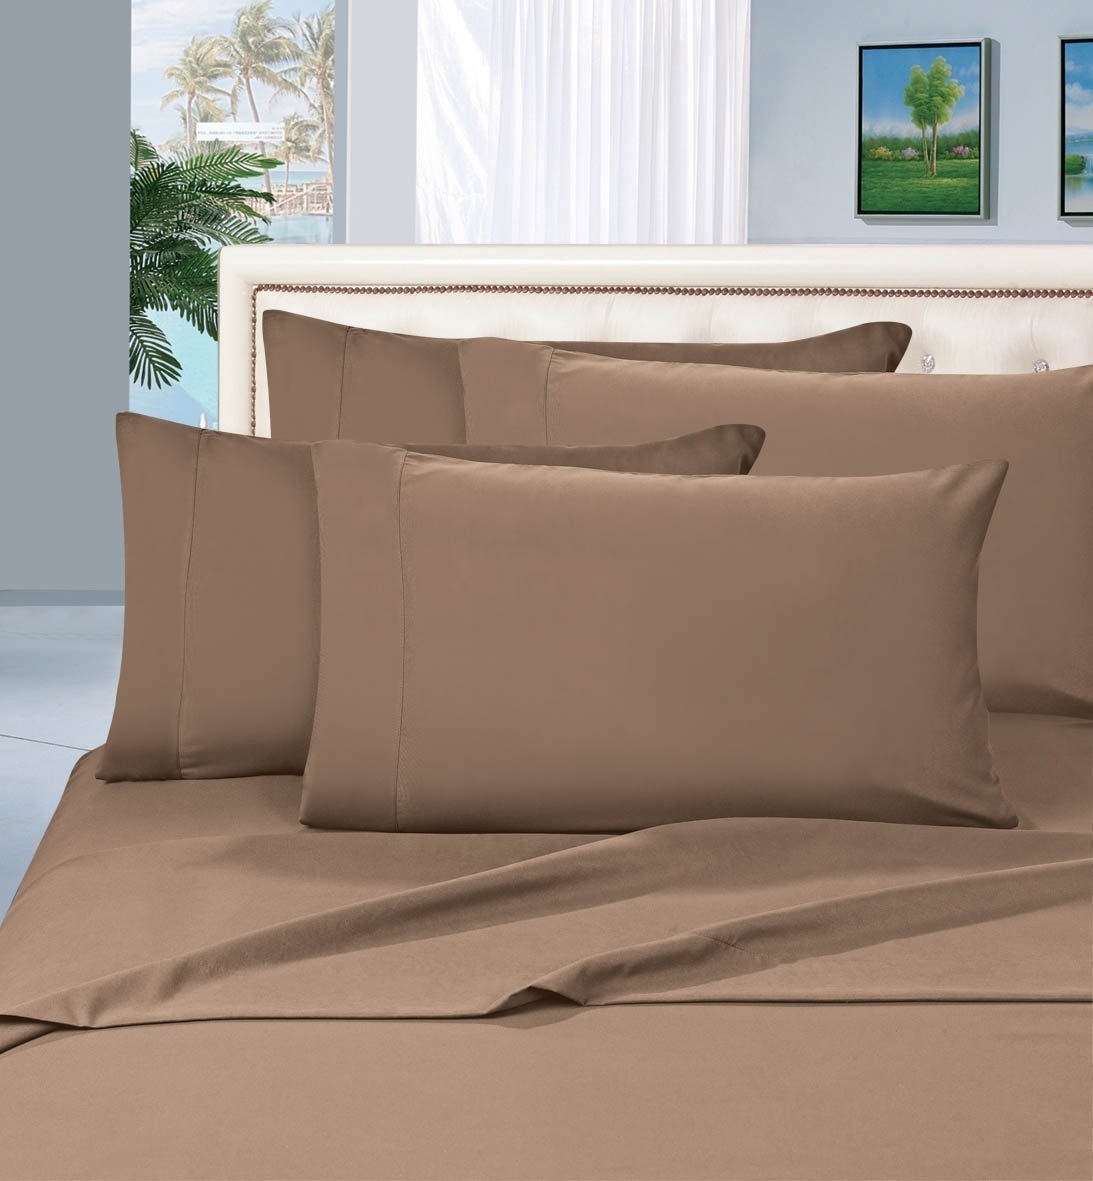 Elegant Comfort 1500 Series Wrinkle Resistant Egyptian Quality Hypoallergenic Ultra Soft Luxury 4-piece Bed Sheet Set, Queen, Taupe